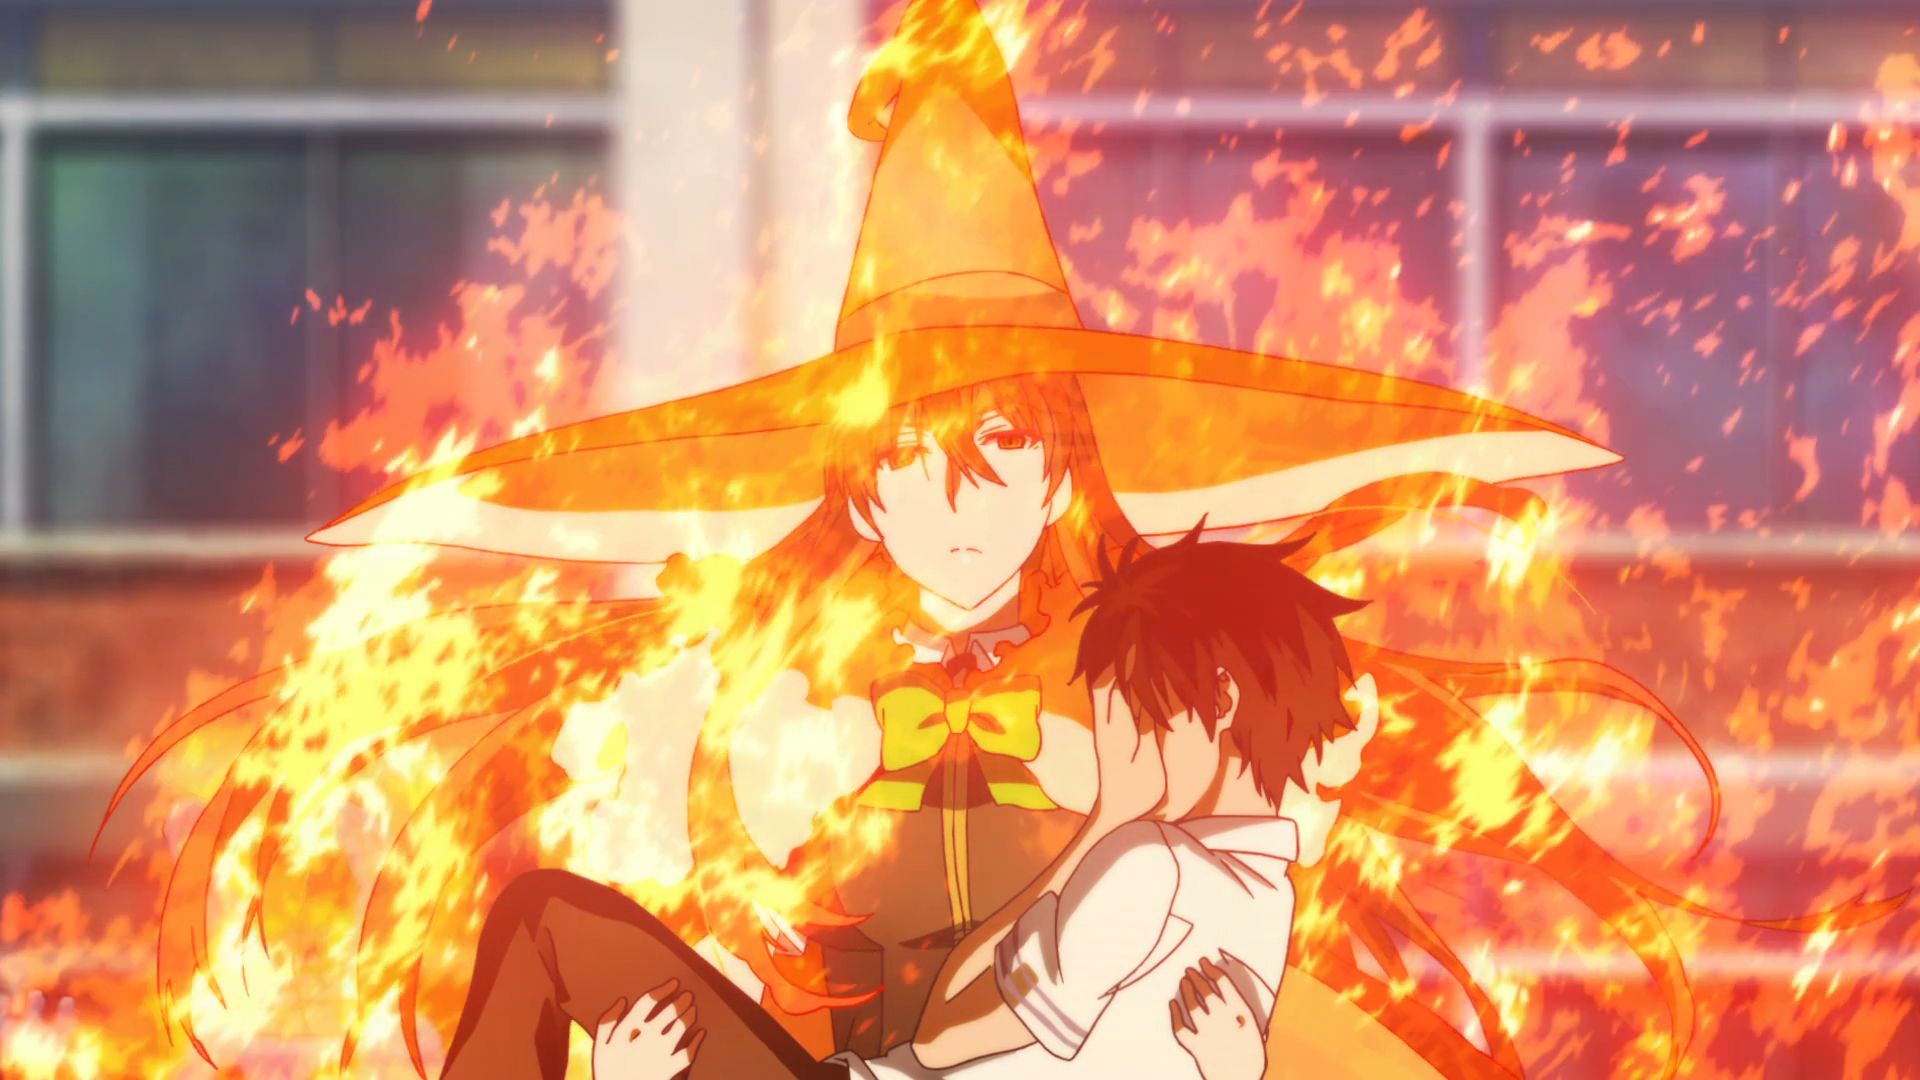 Witch Craft works Кагари